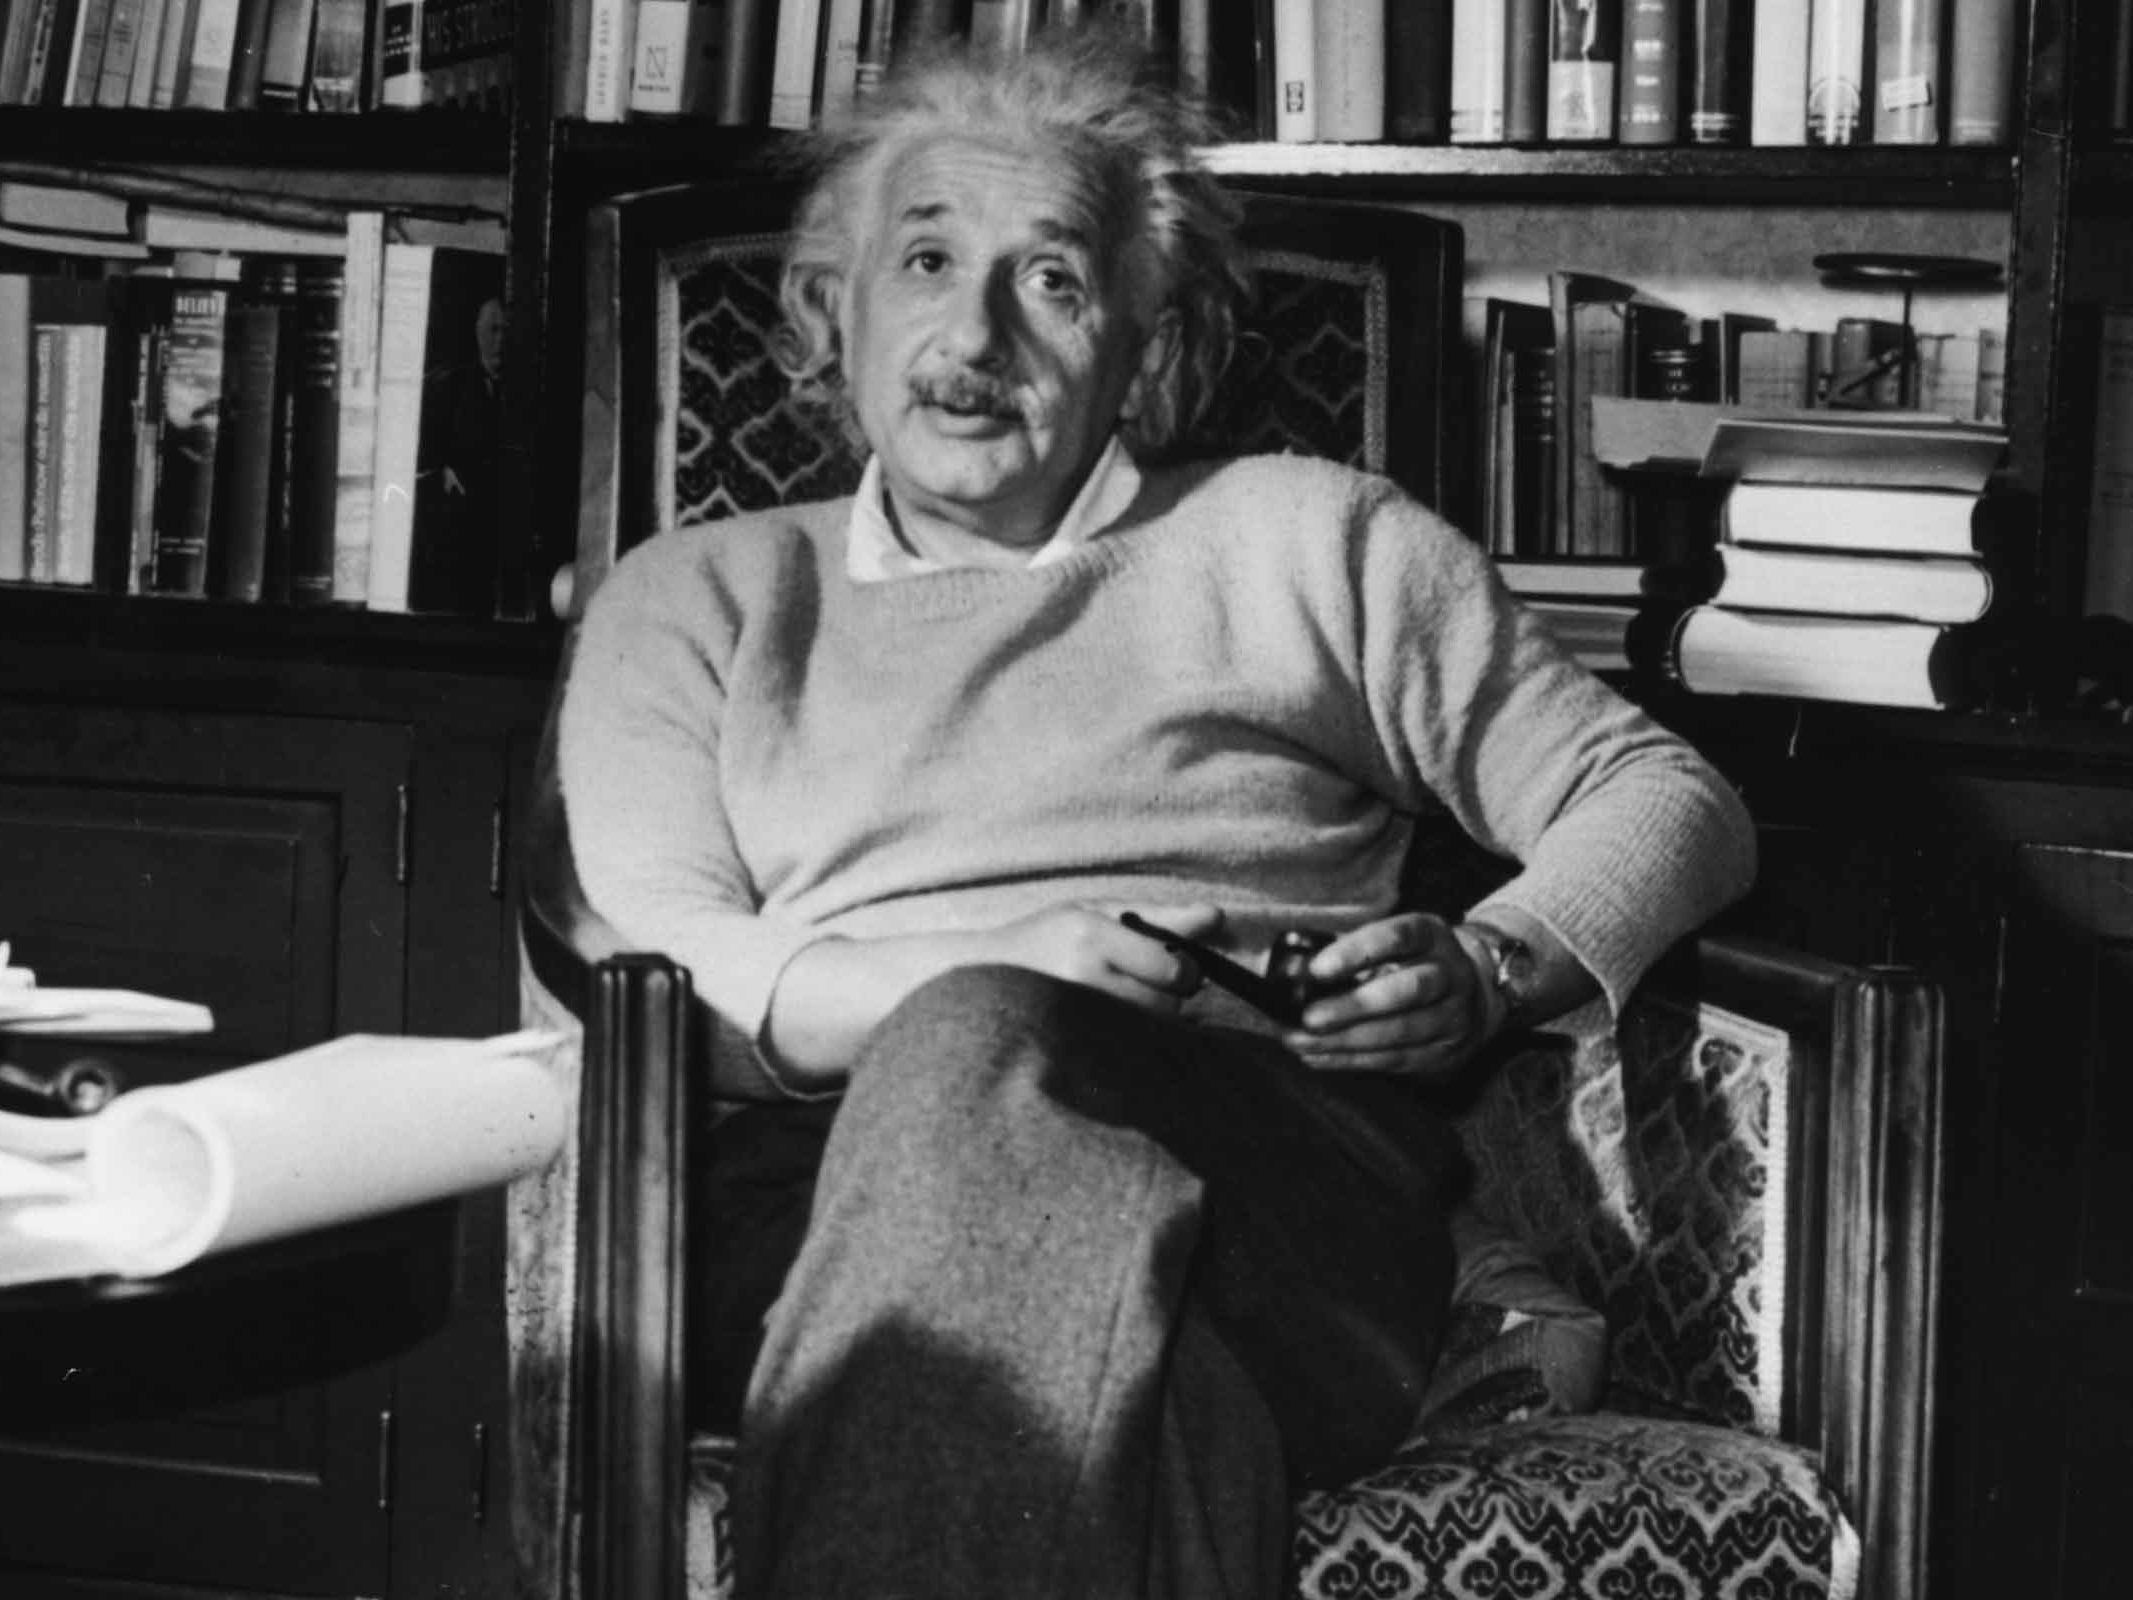 Albert Einstein letter discusses link between physics and biology